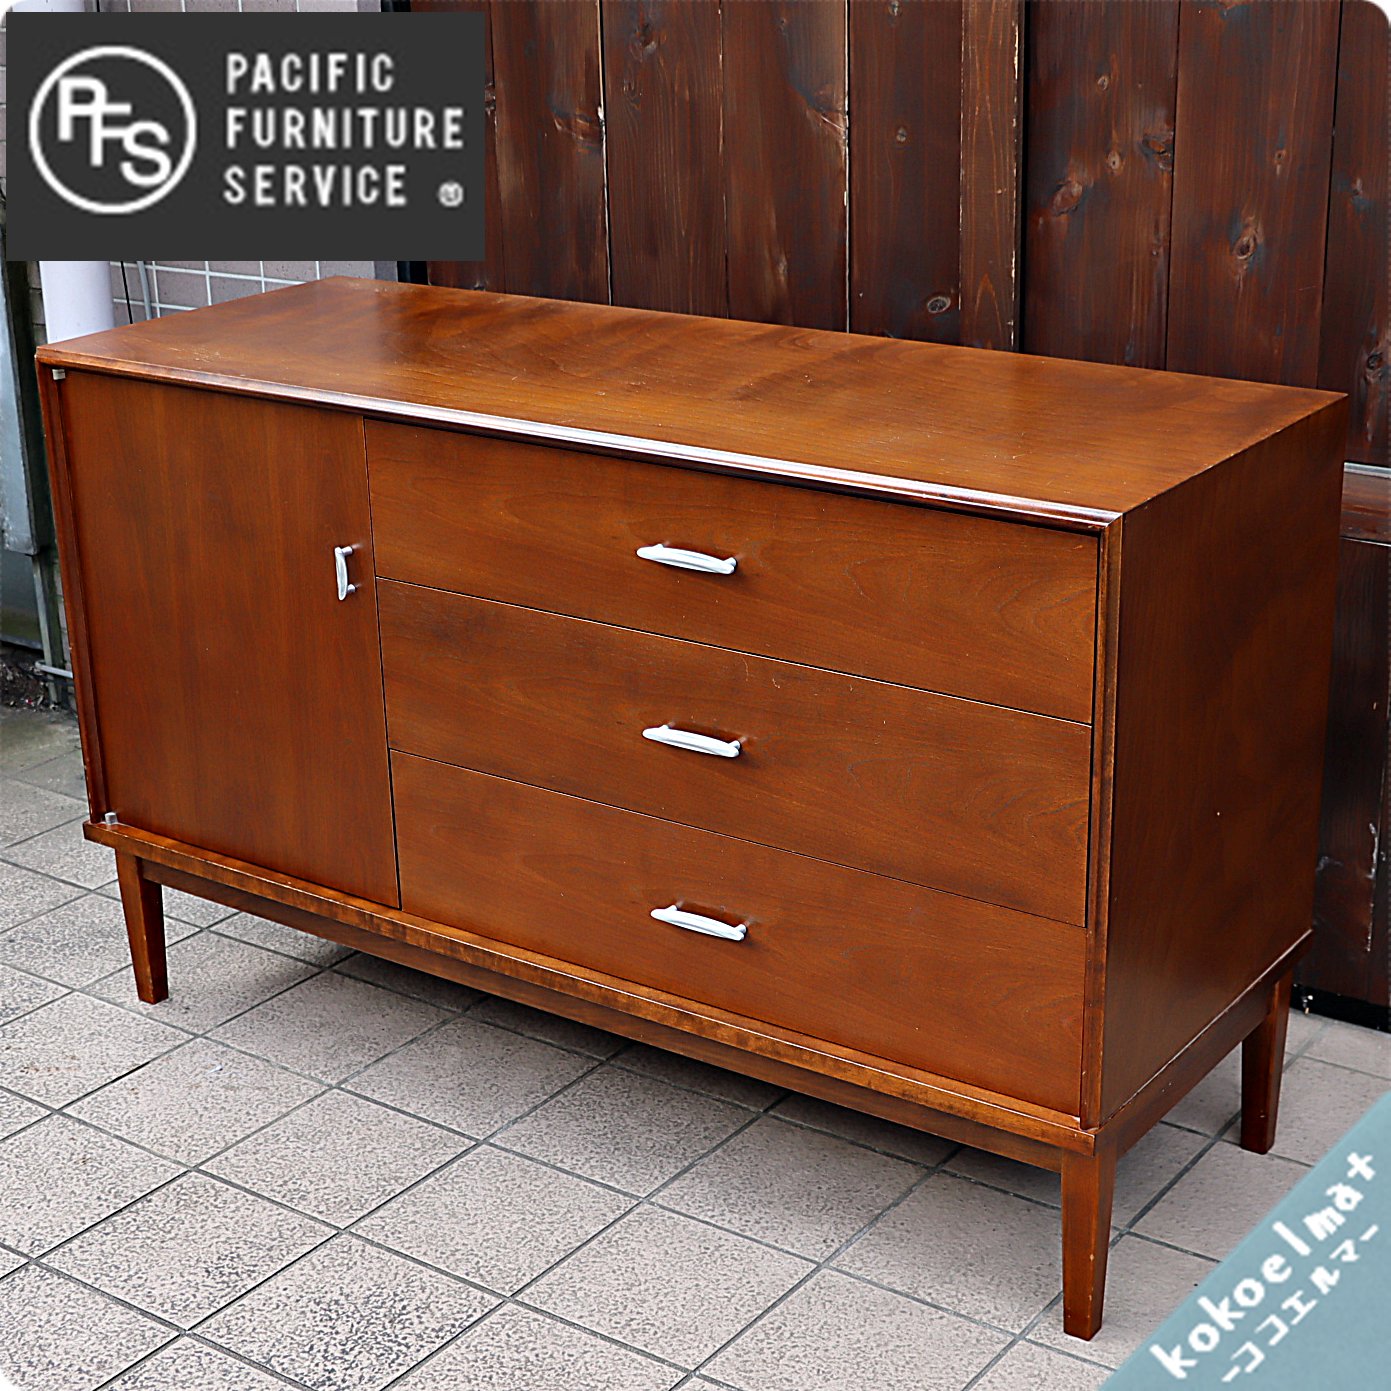 PACIFIC FURNITURE SERVICE(パシフィックファニチャー 